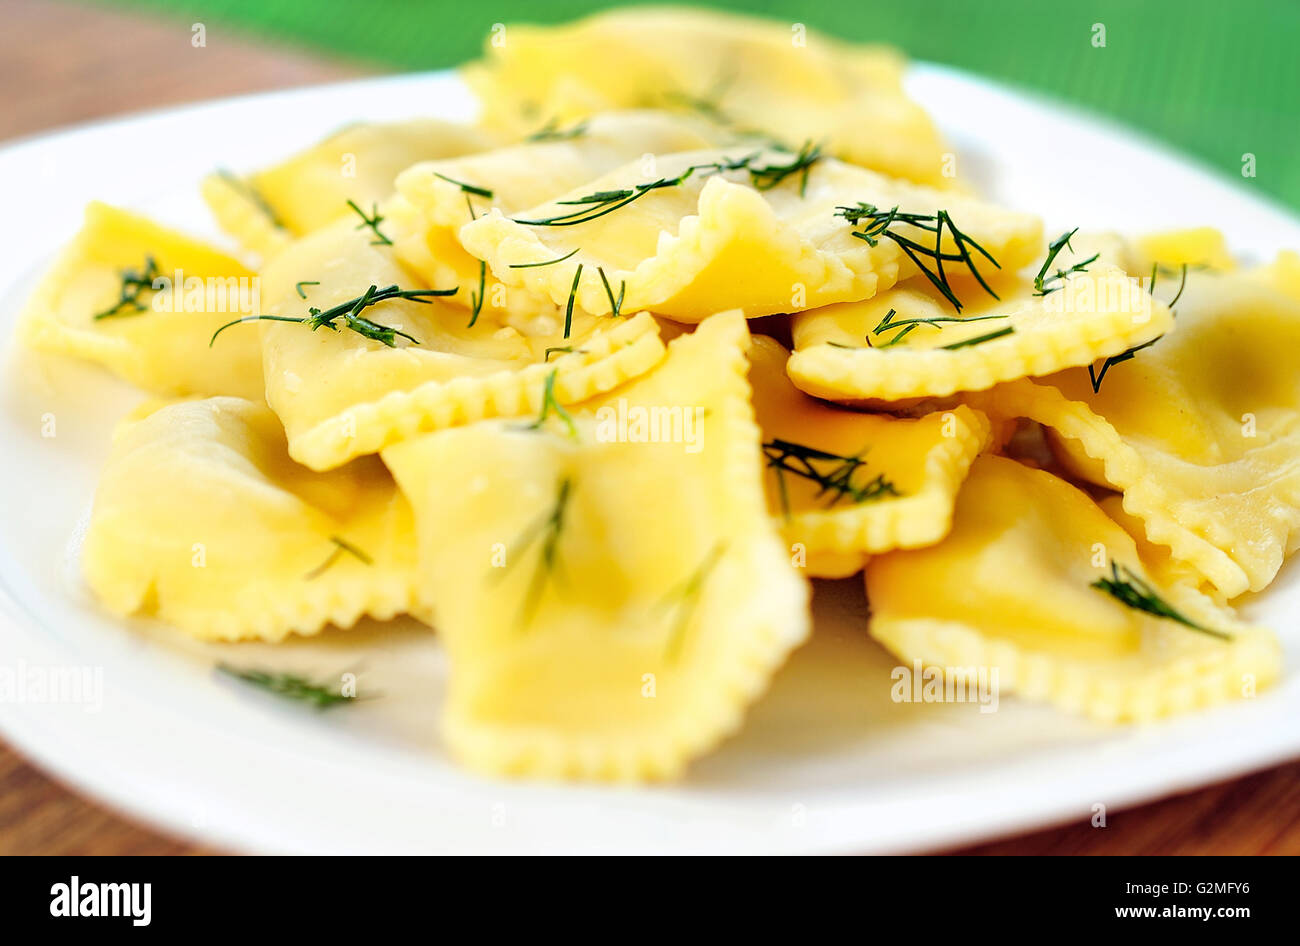 Plate with ravioli on table Stock Photo